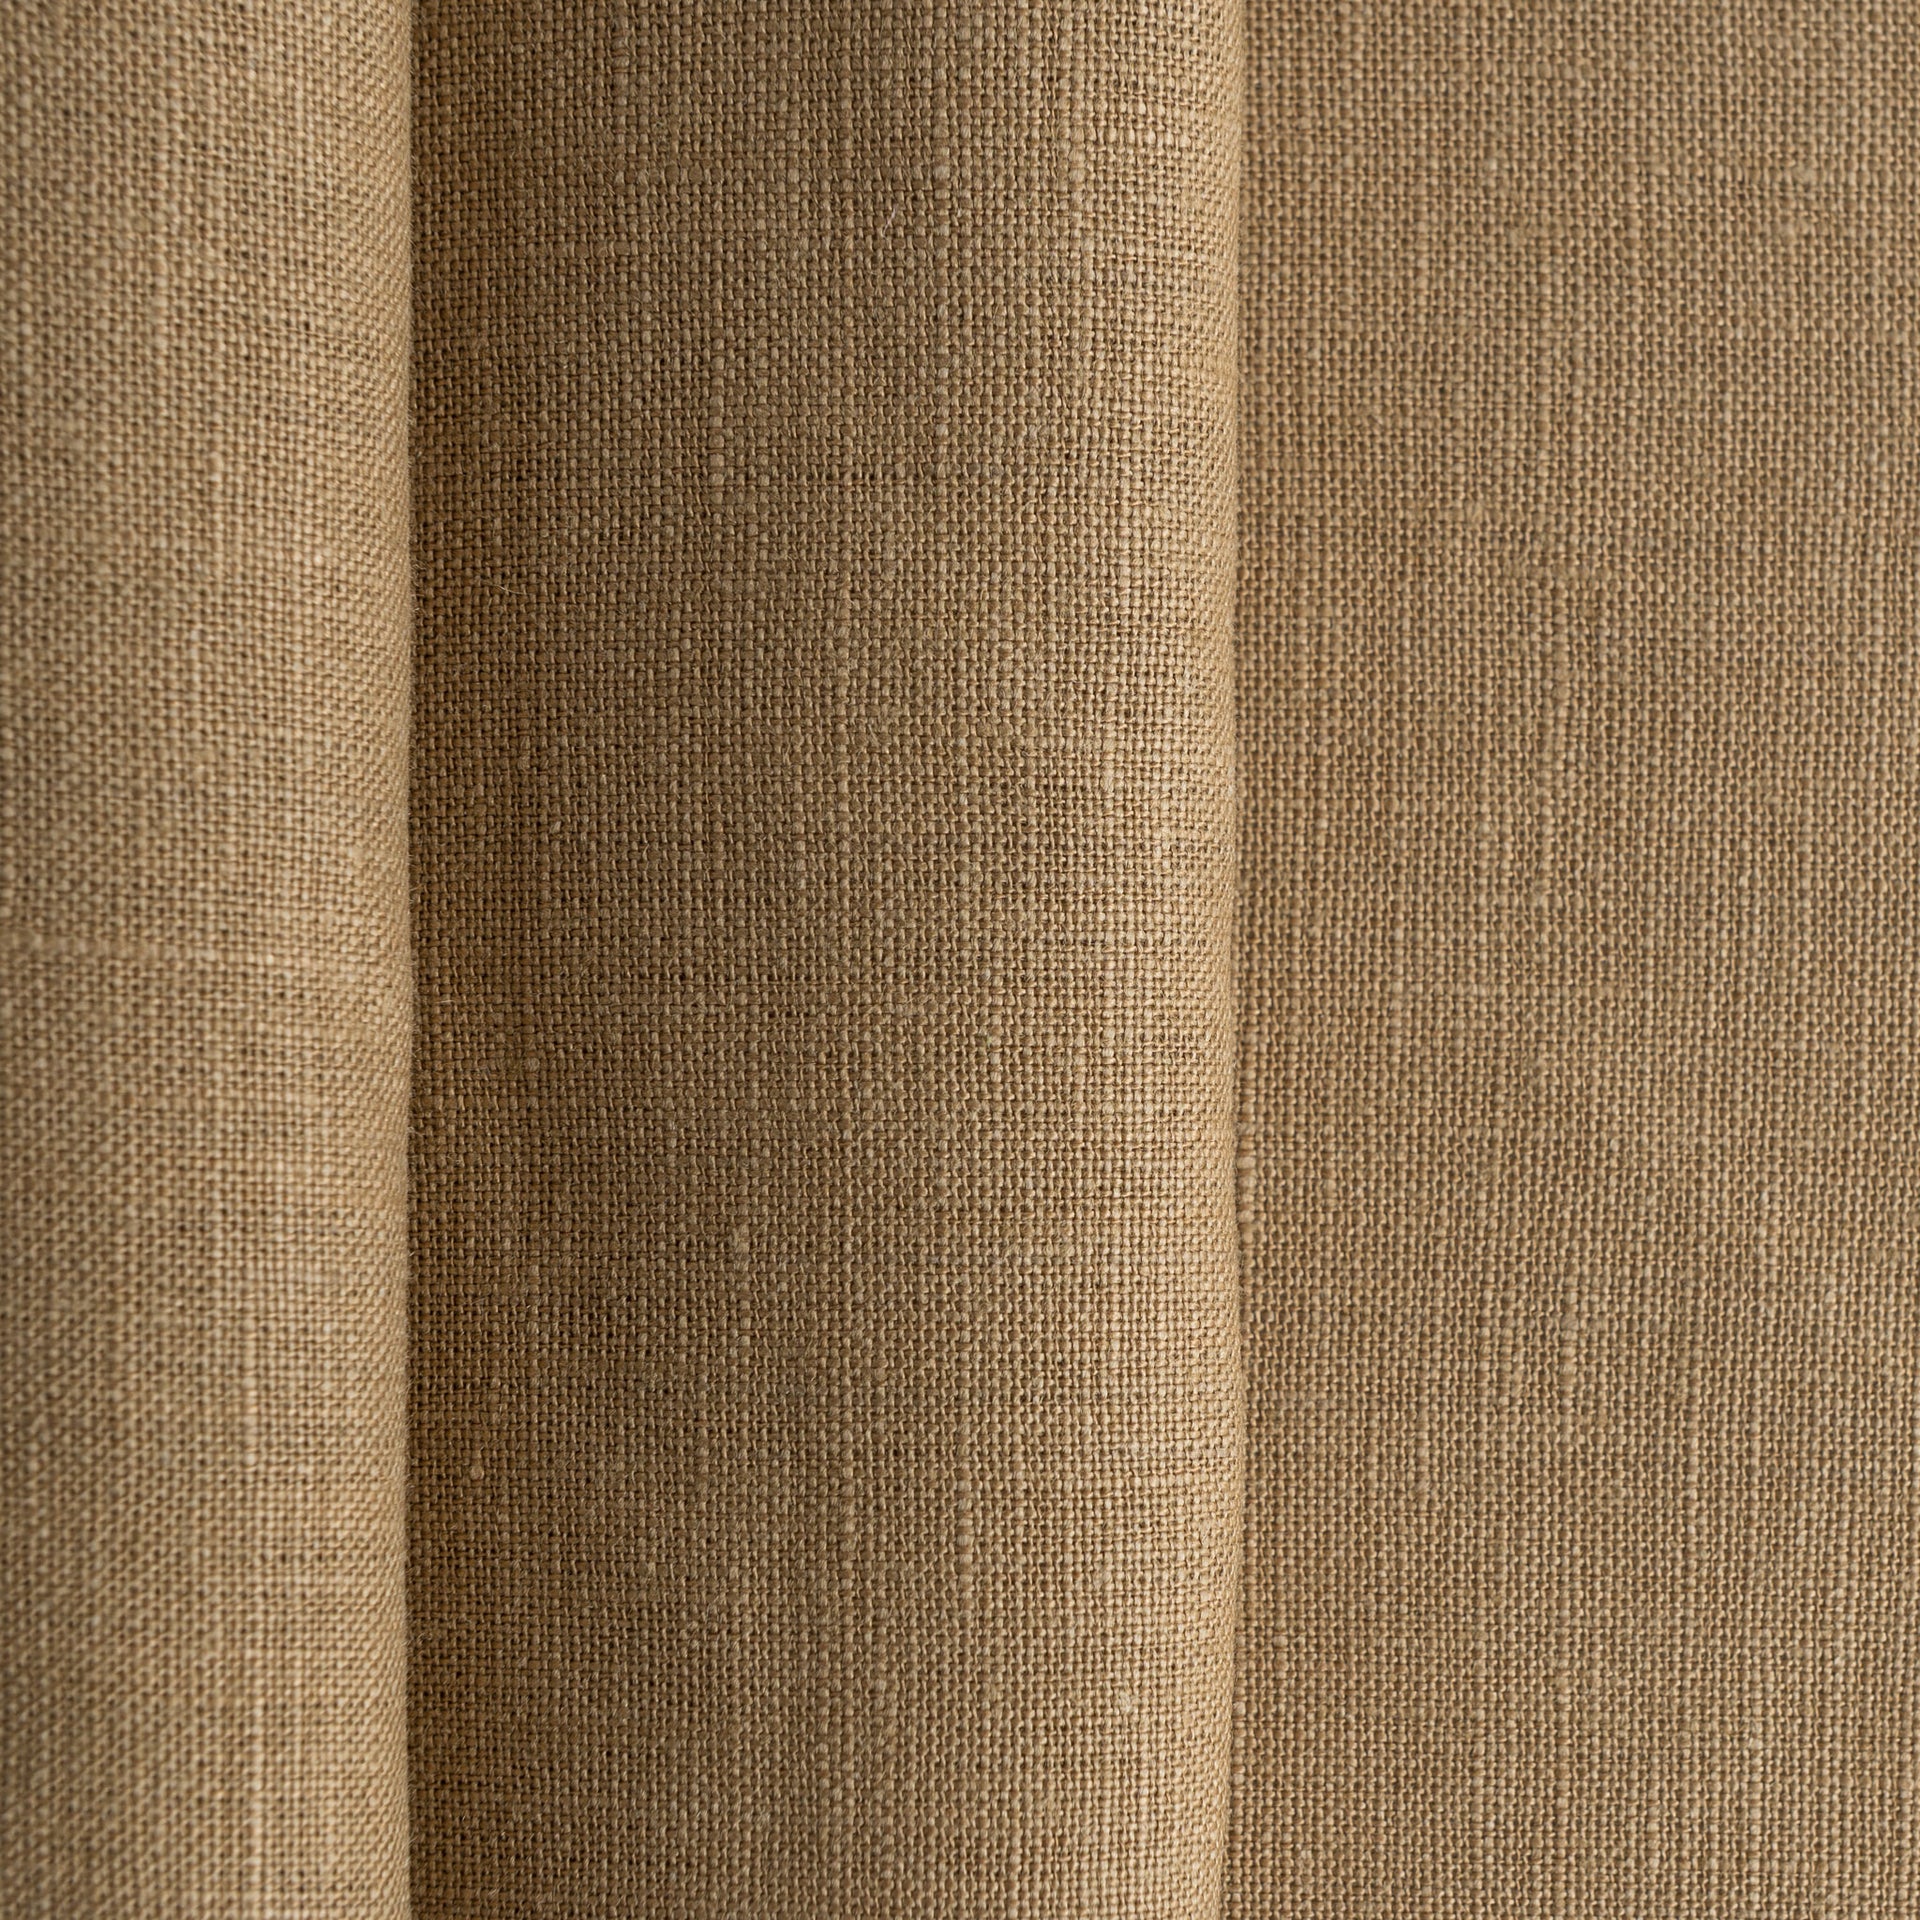 Tawny Brown Linen Fabric by the Meter - 100% French Natural - Width 133 cm, 267 cm